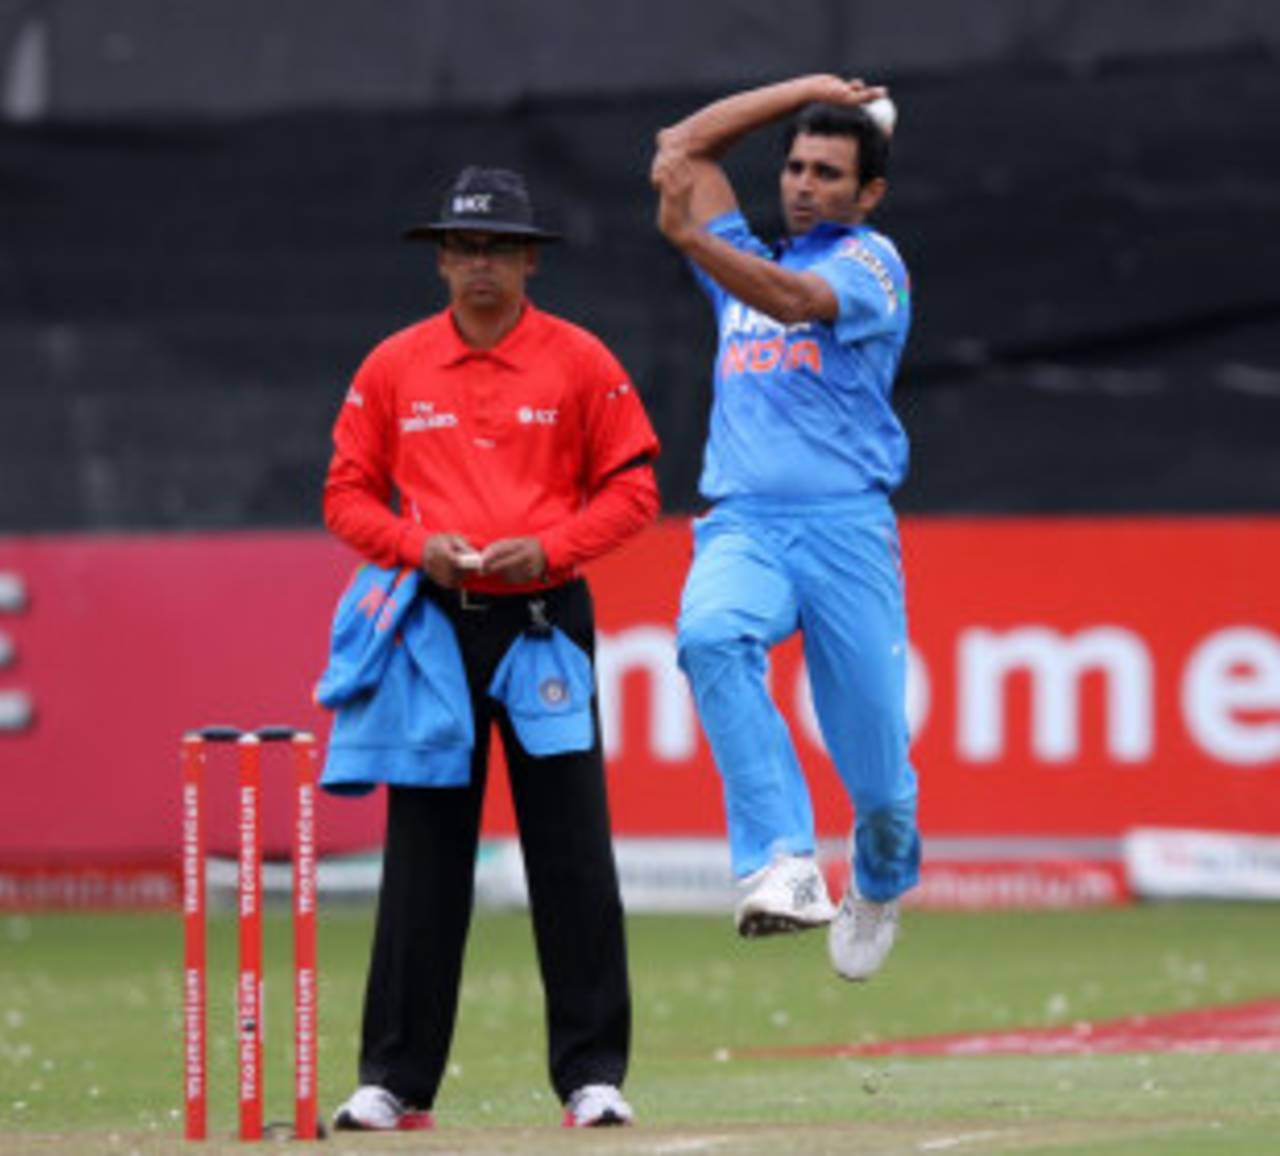 Mohammed Shami in his delivery stride, South Africa v India, 2nd ODI, Durban, December 8, 2013